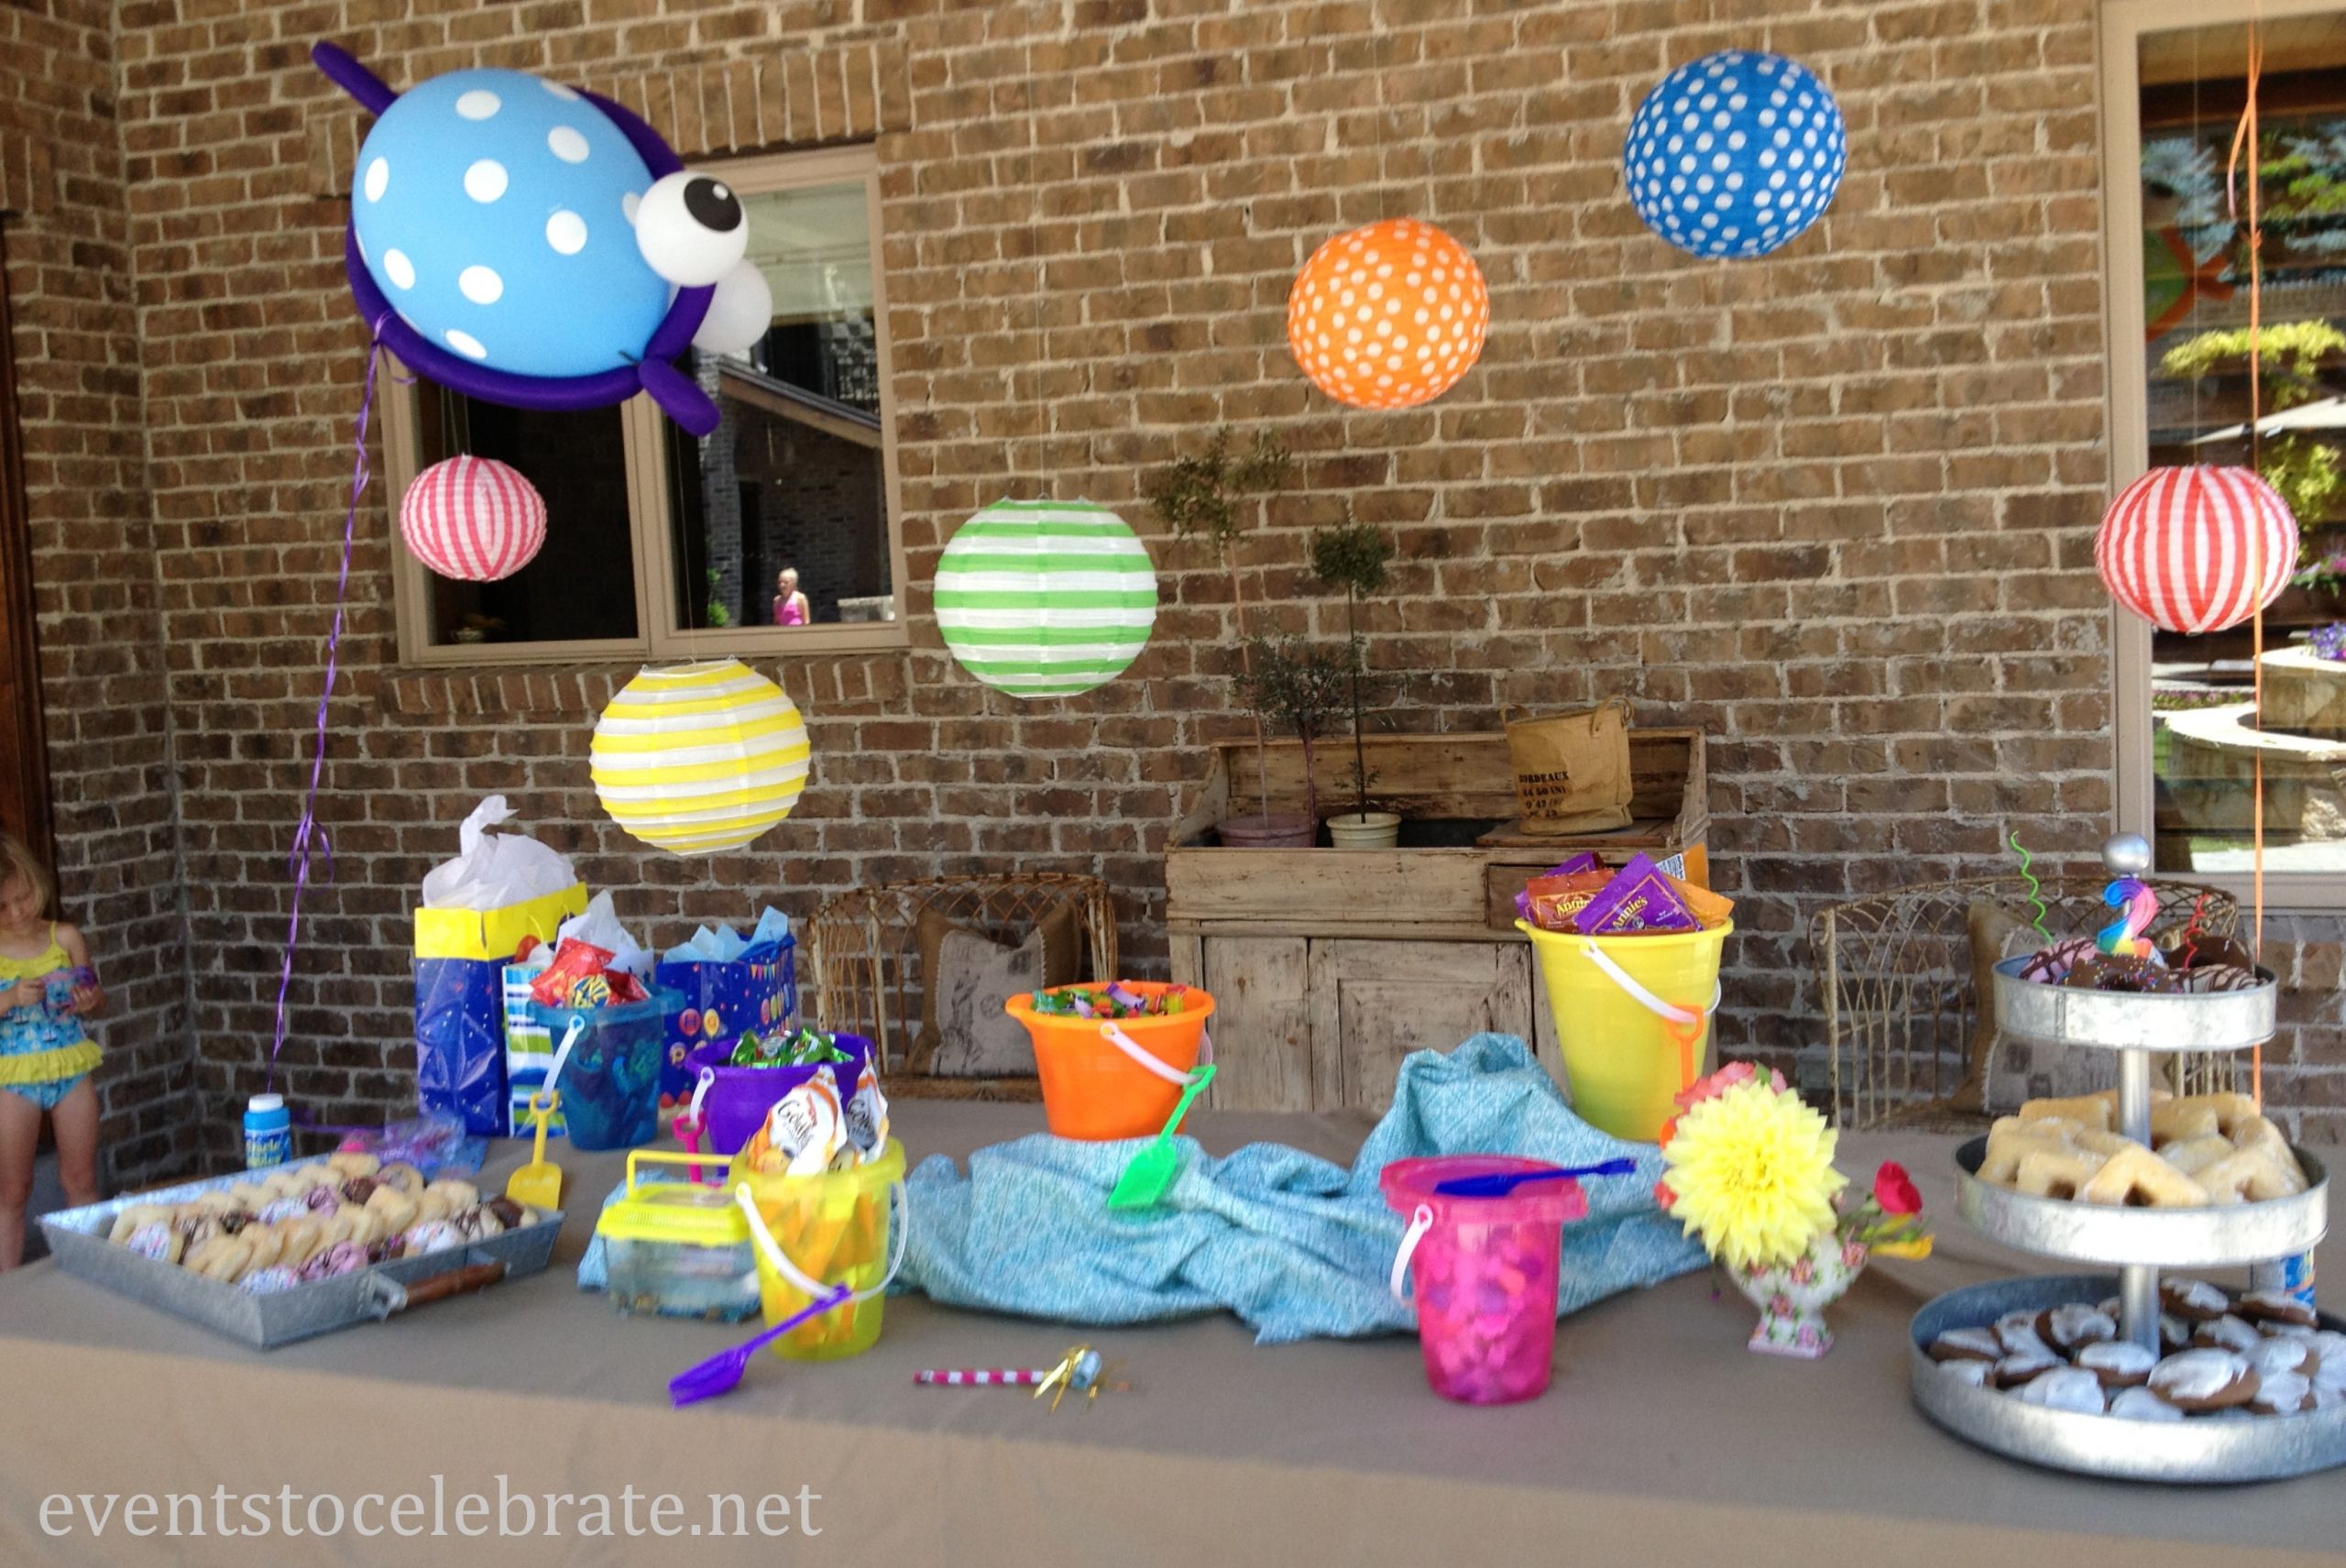 Pool Party Decoration Ideas
 Pool Party Ideas events to CELEBRATE